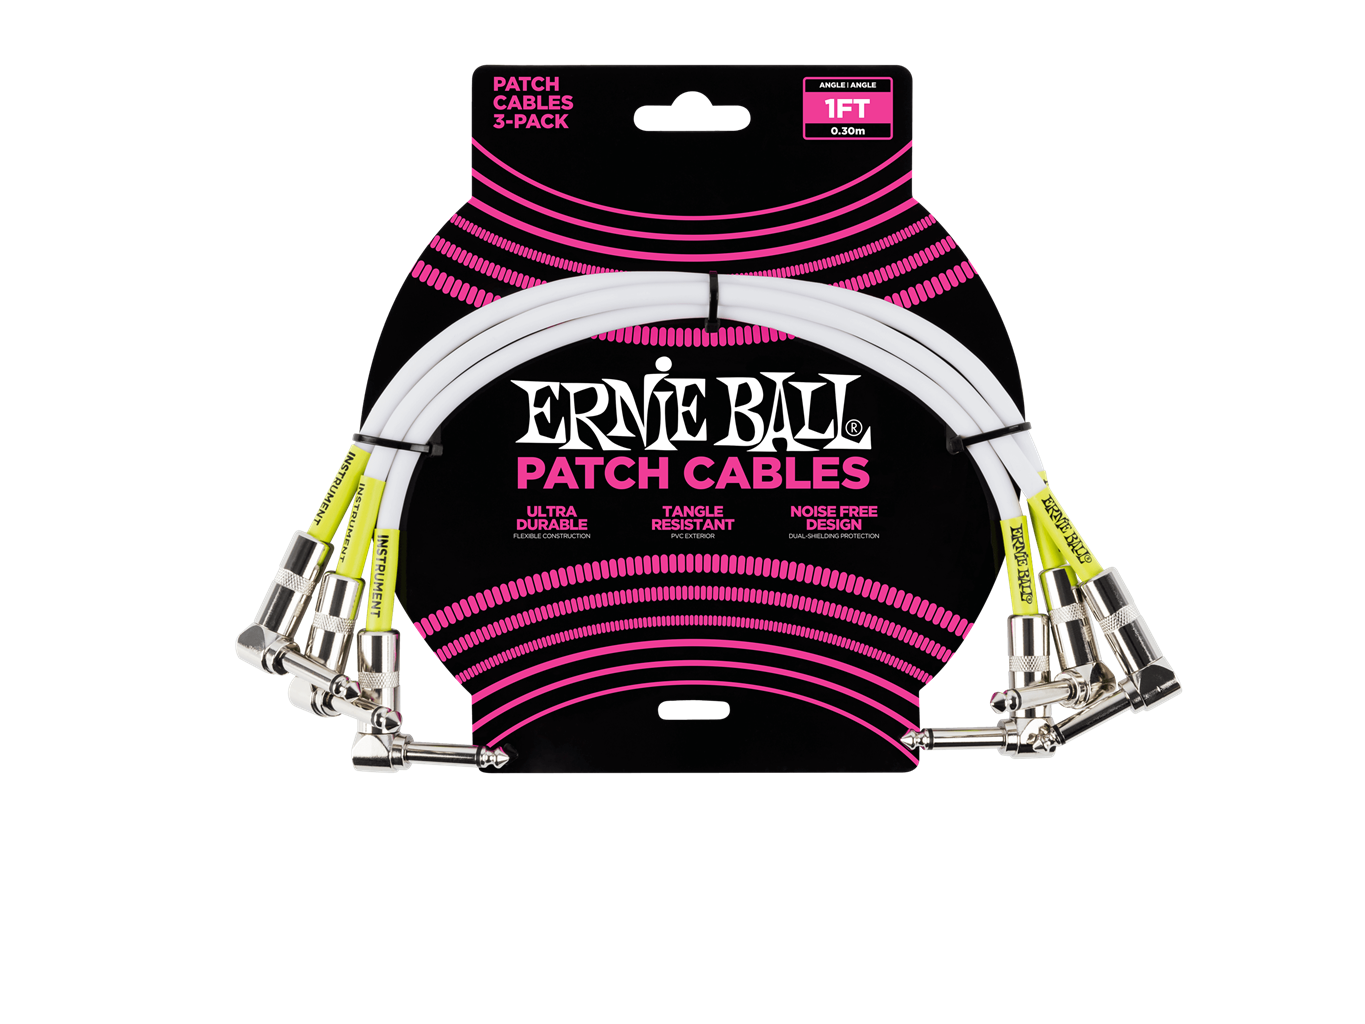 Ernie Ball 1ft Patch Cable 3pk White